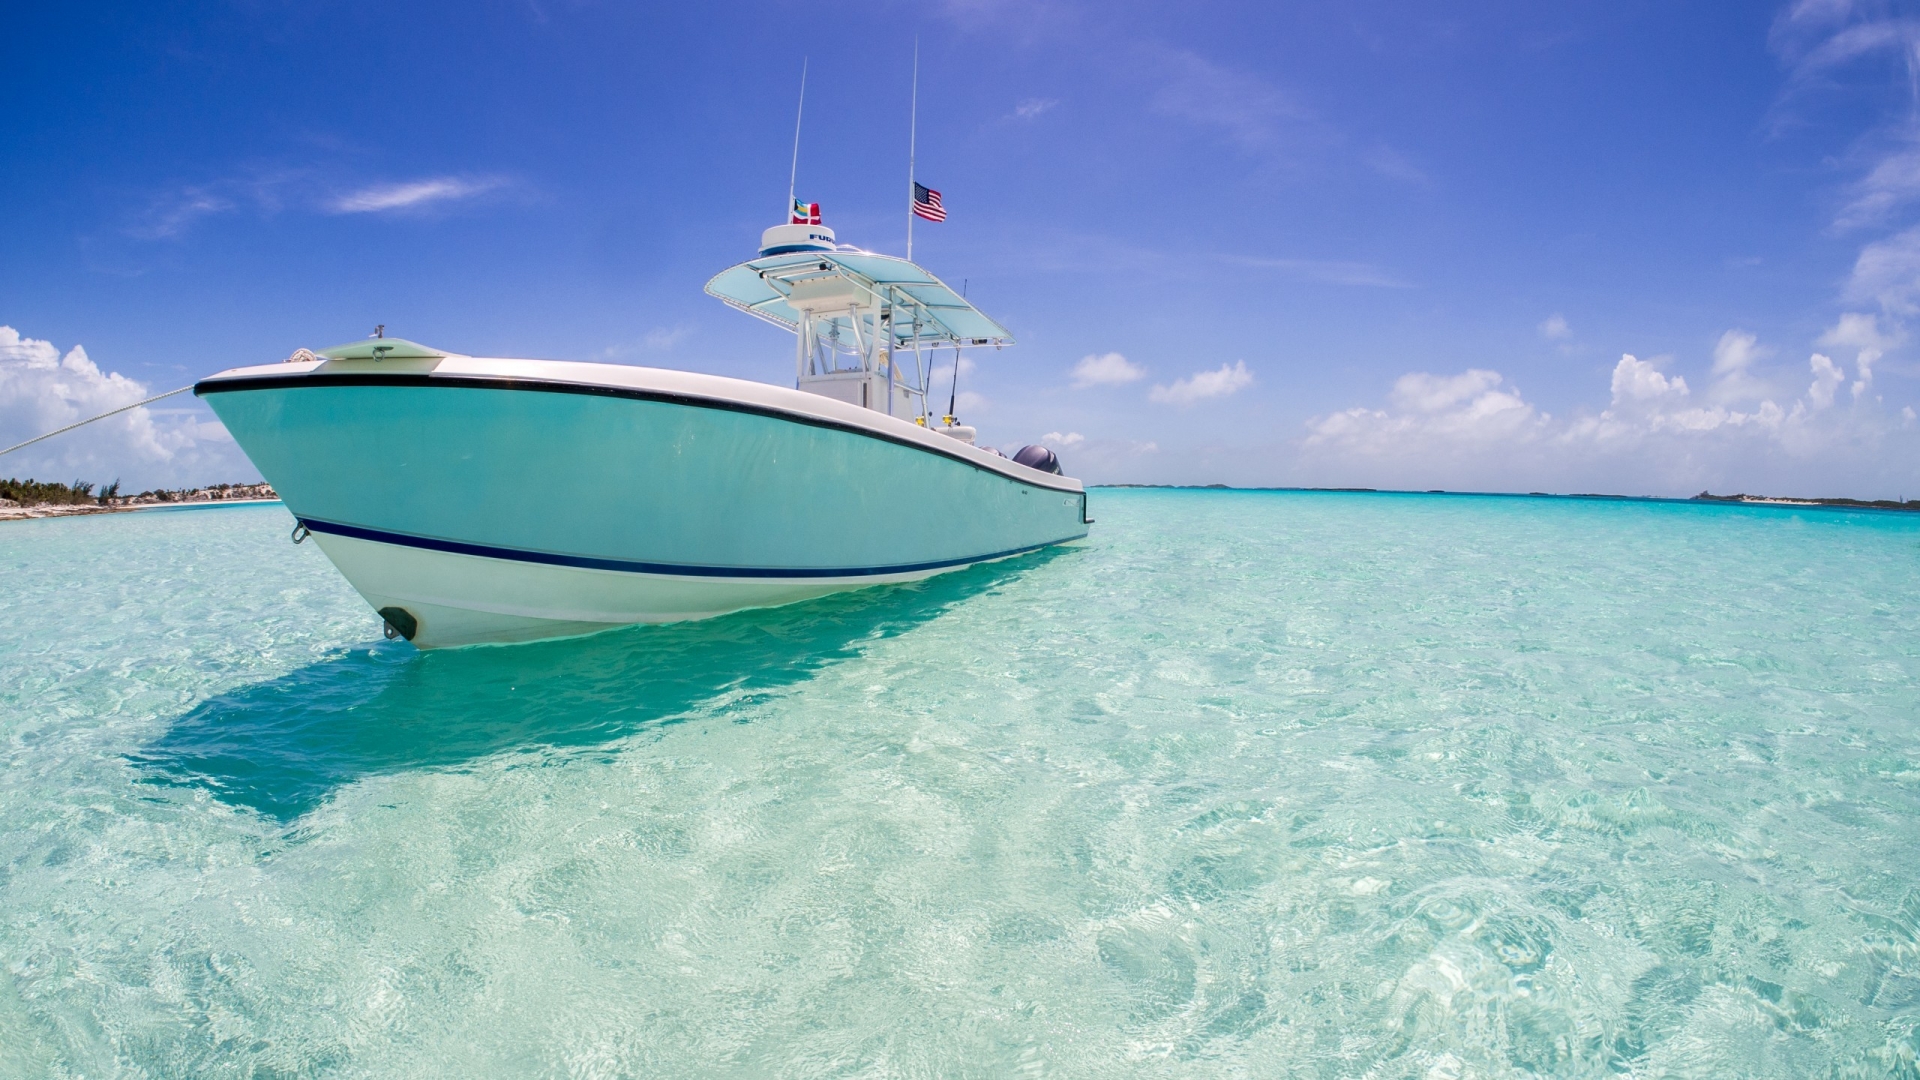 Boat in Paradise for 1920 x 1080 HDTV 1080p resolution